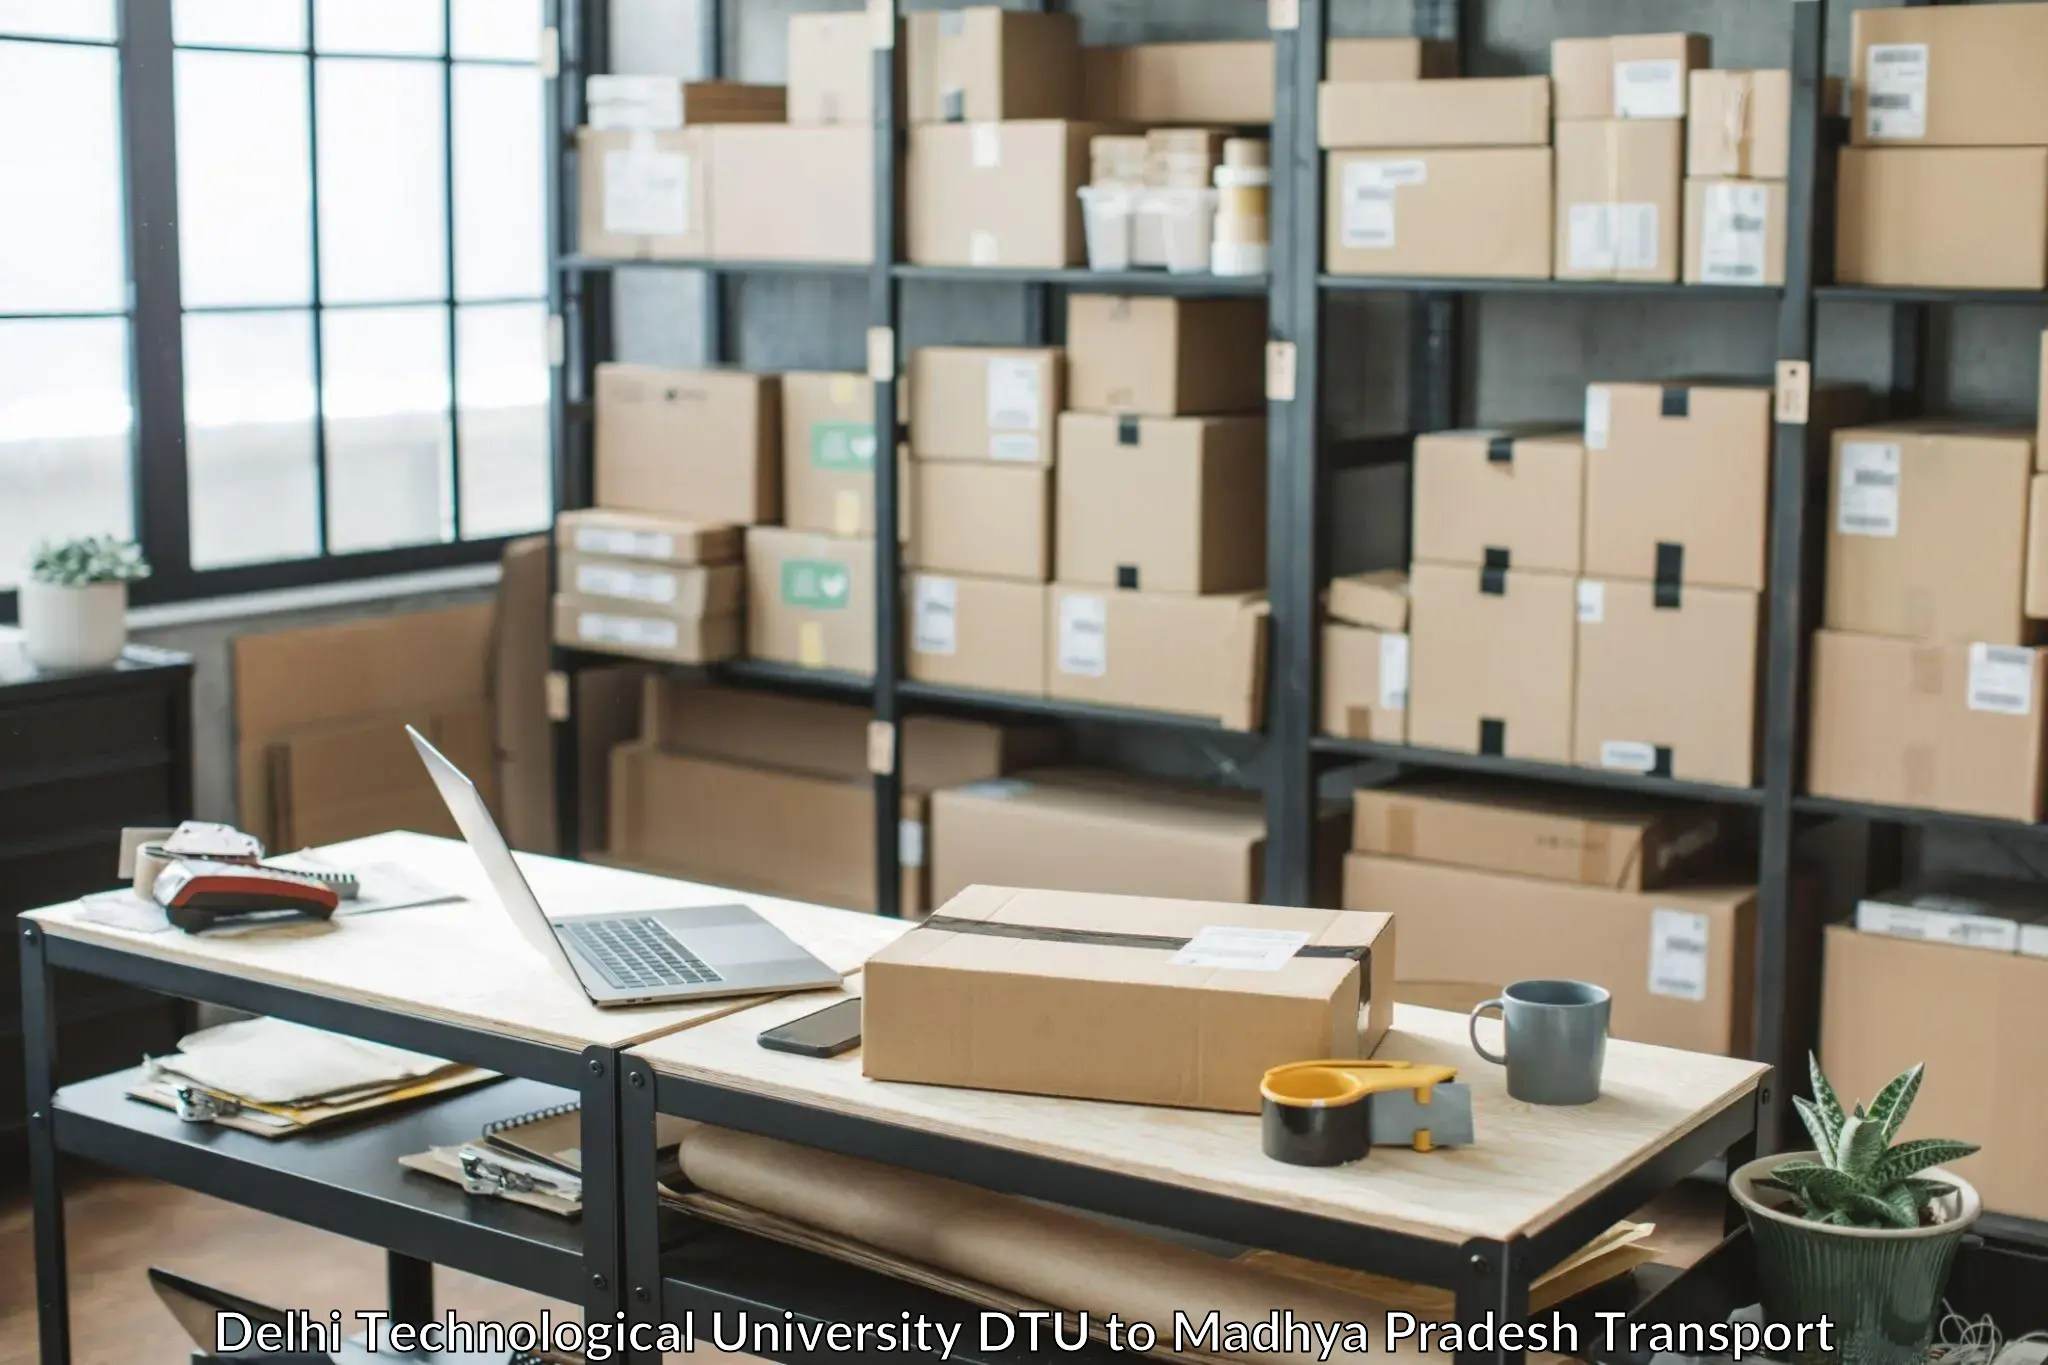 Shipping services Delhi Technological University DTU to Sheopur